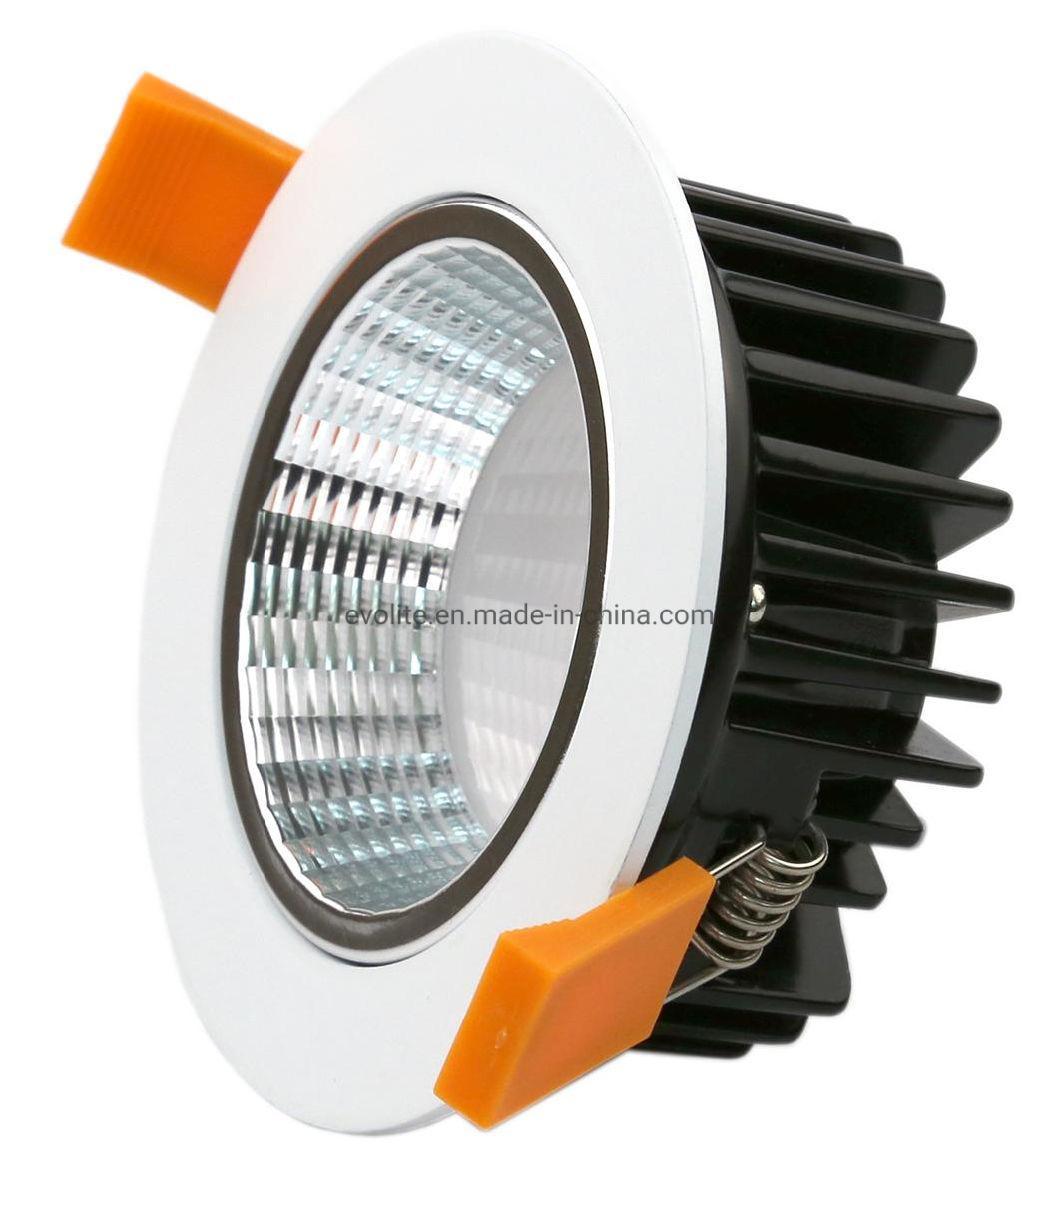 Round Cut out 90mm Recessed Downlight Lamp Price IP44 10W LED Downlight X4b